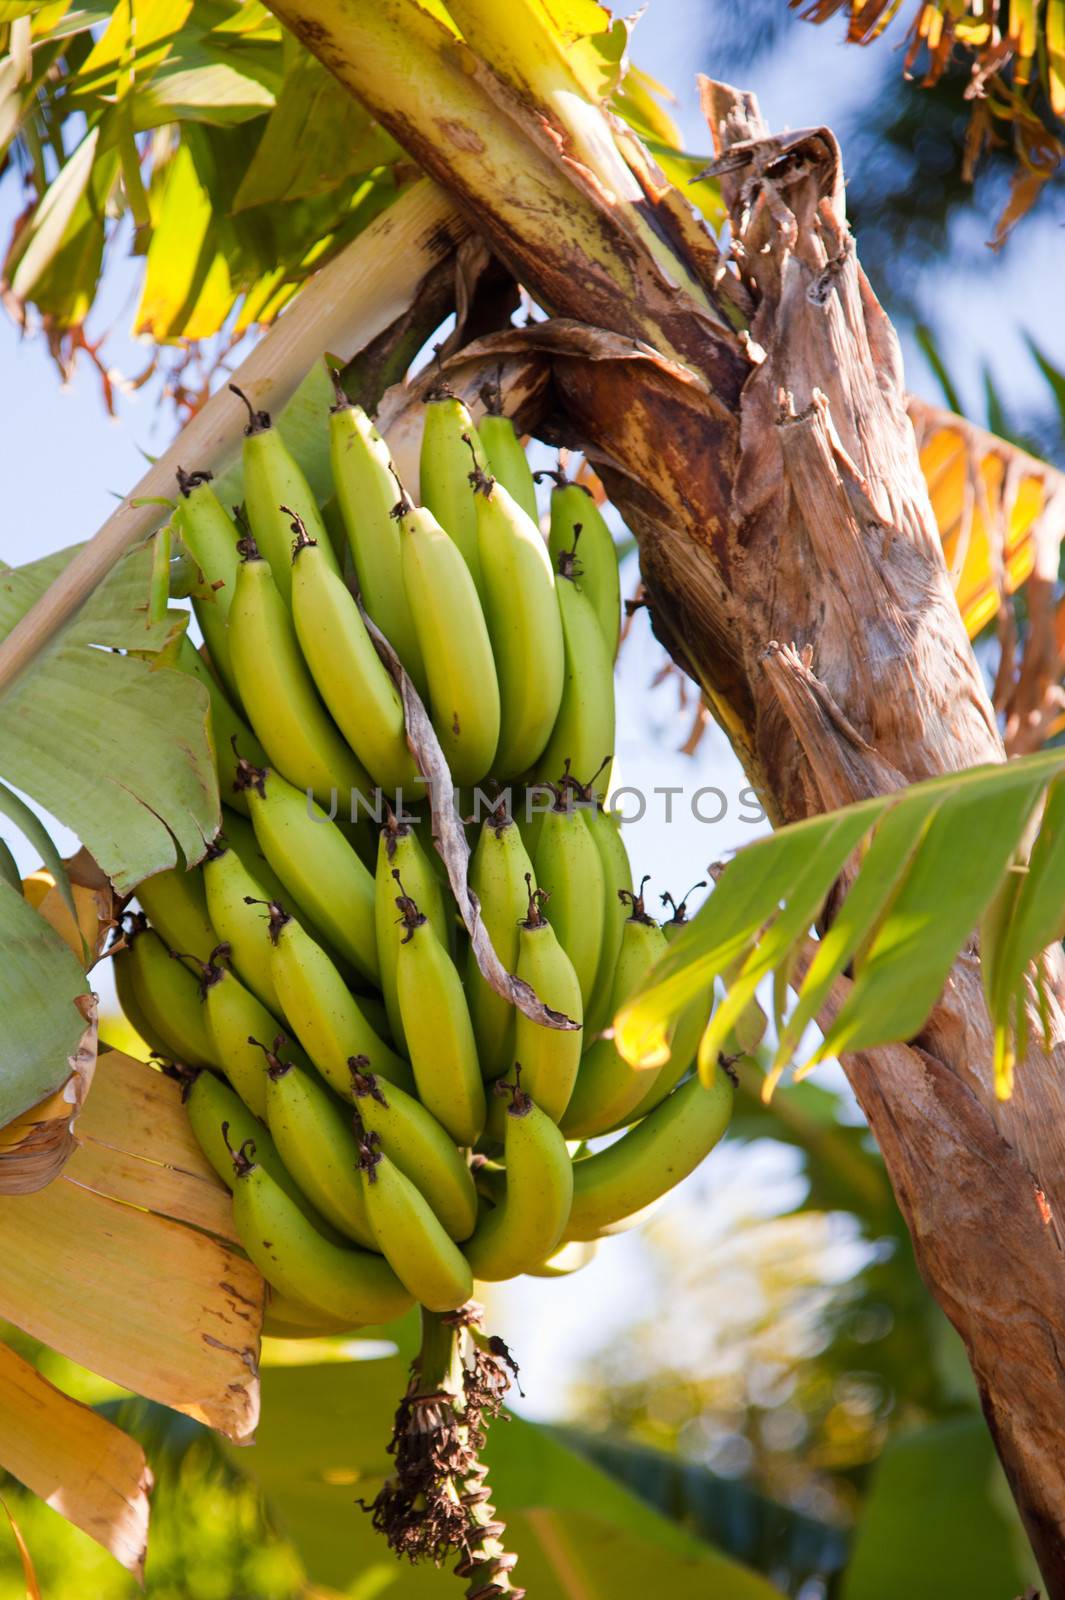 Bunch of bananas growing on the plant, ready to be picked.